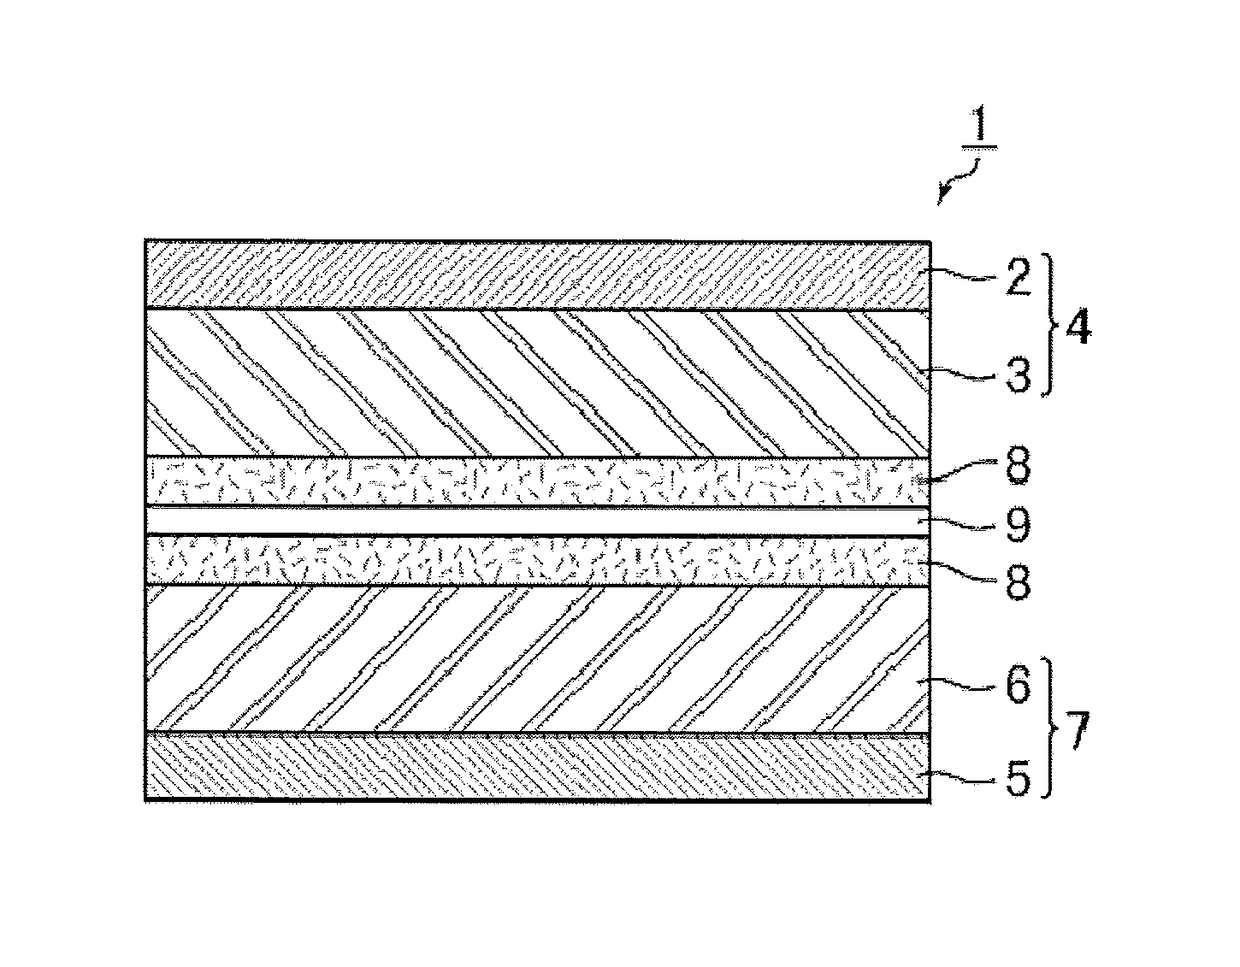 Additive for nonaqueous electrolyte, nonaqueous electrolyte, and electricity storage device